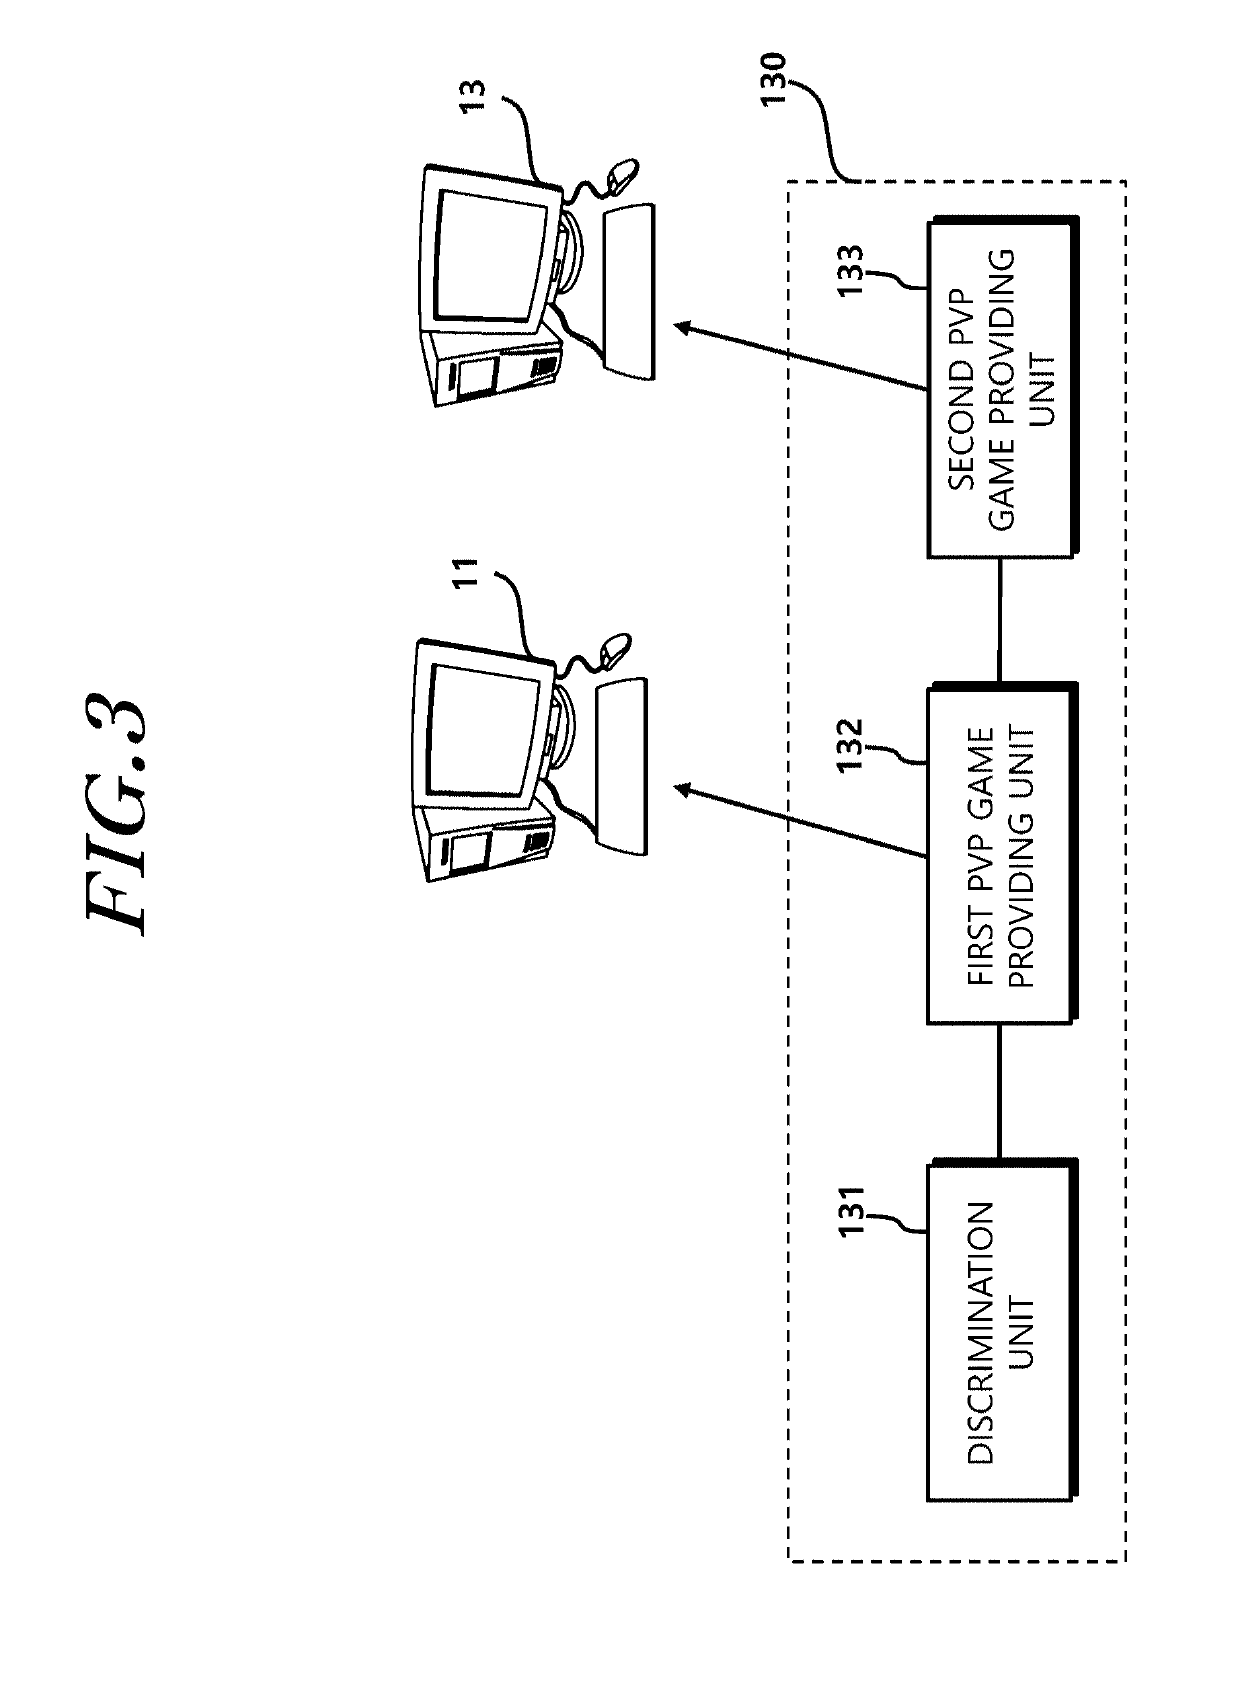 Combat game providing device and method